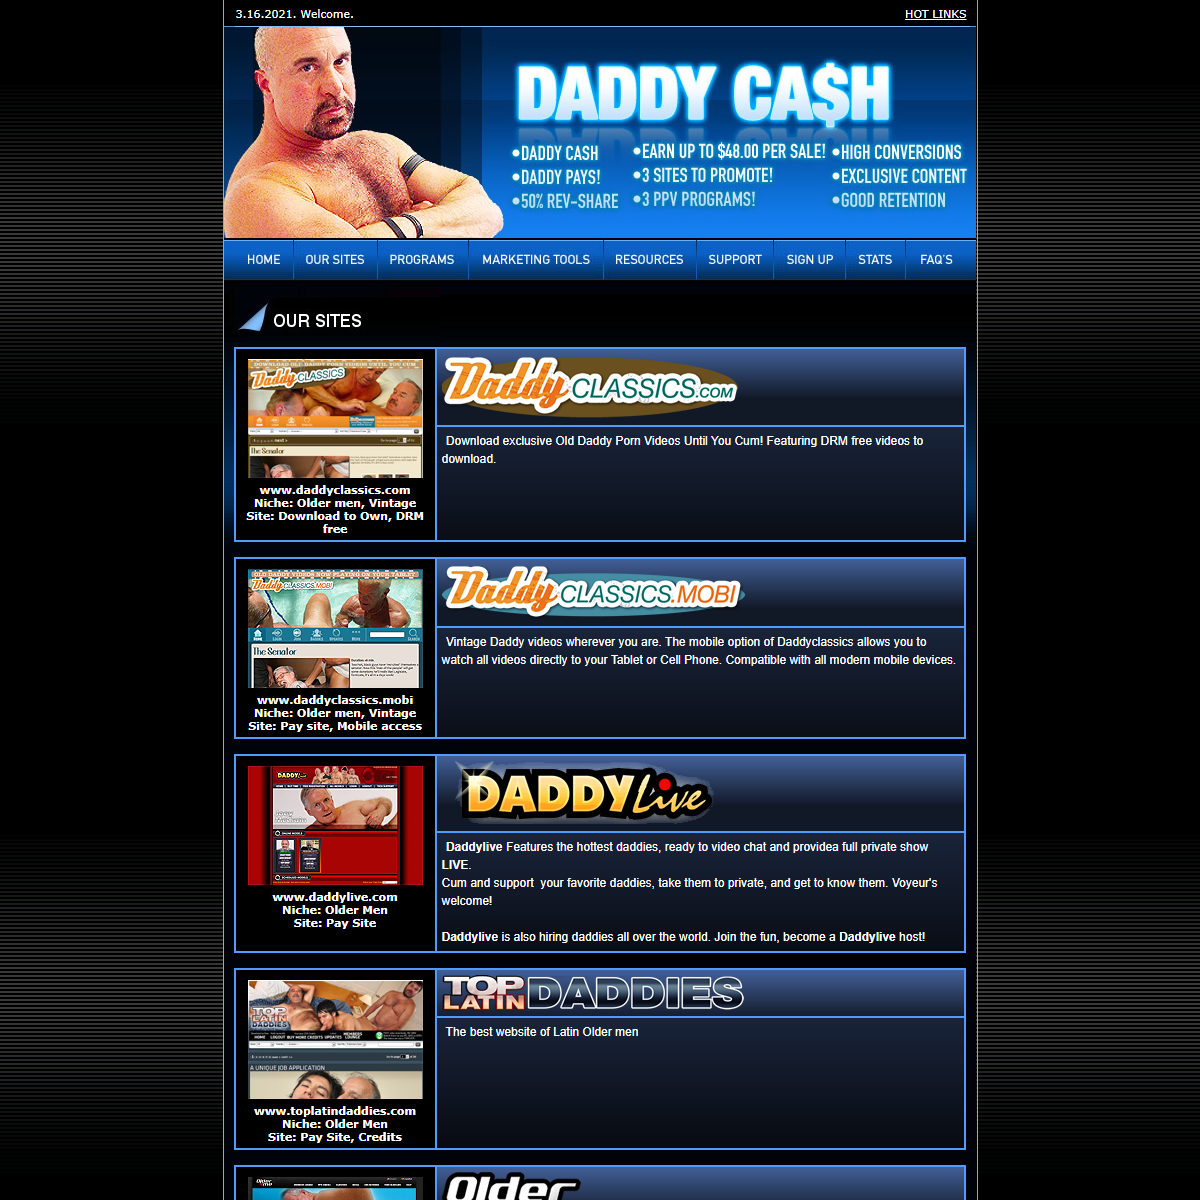 A complete backup of http://www.daddycash.com/sites.php